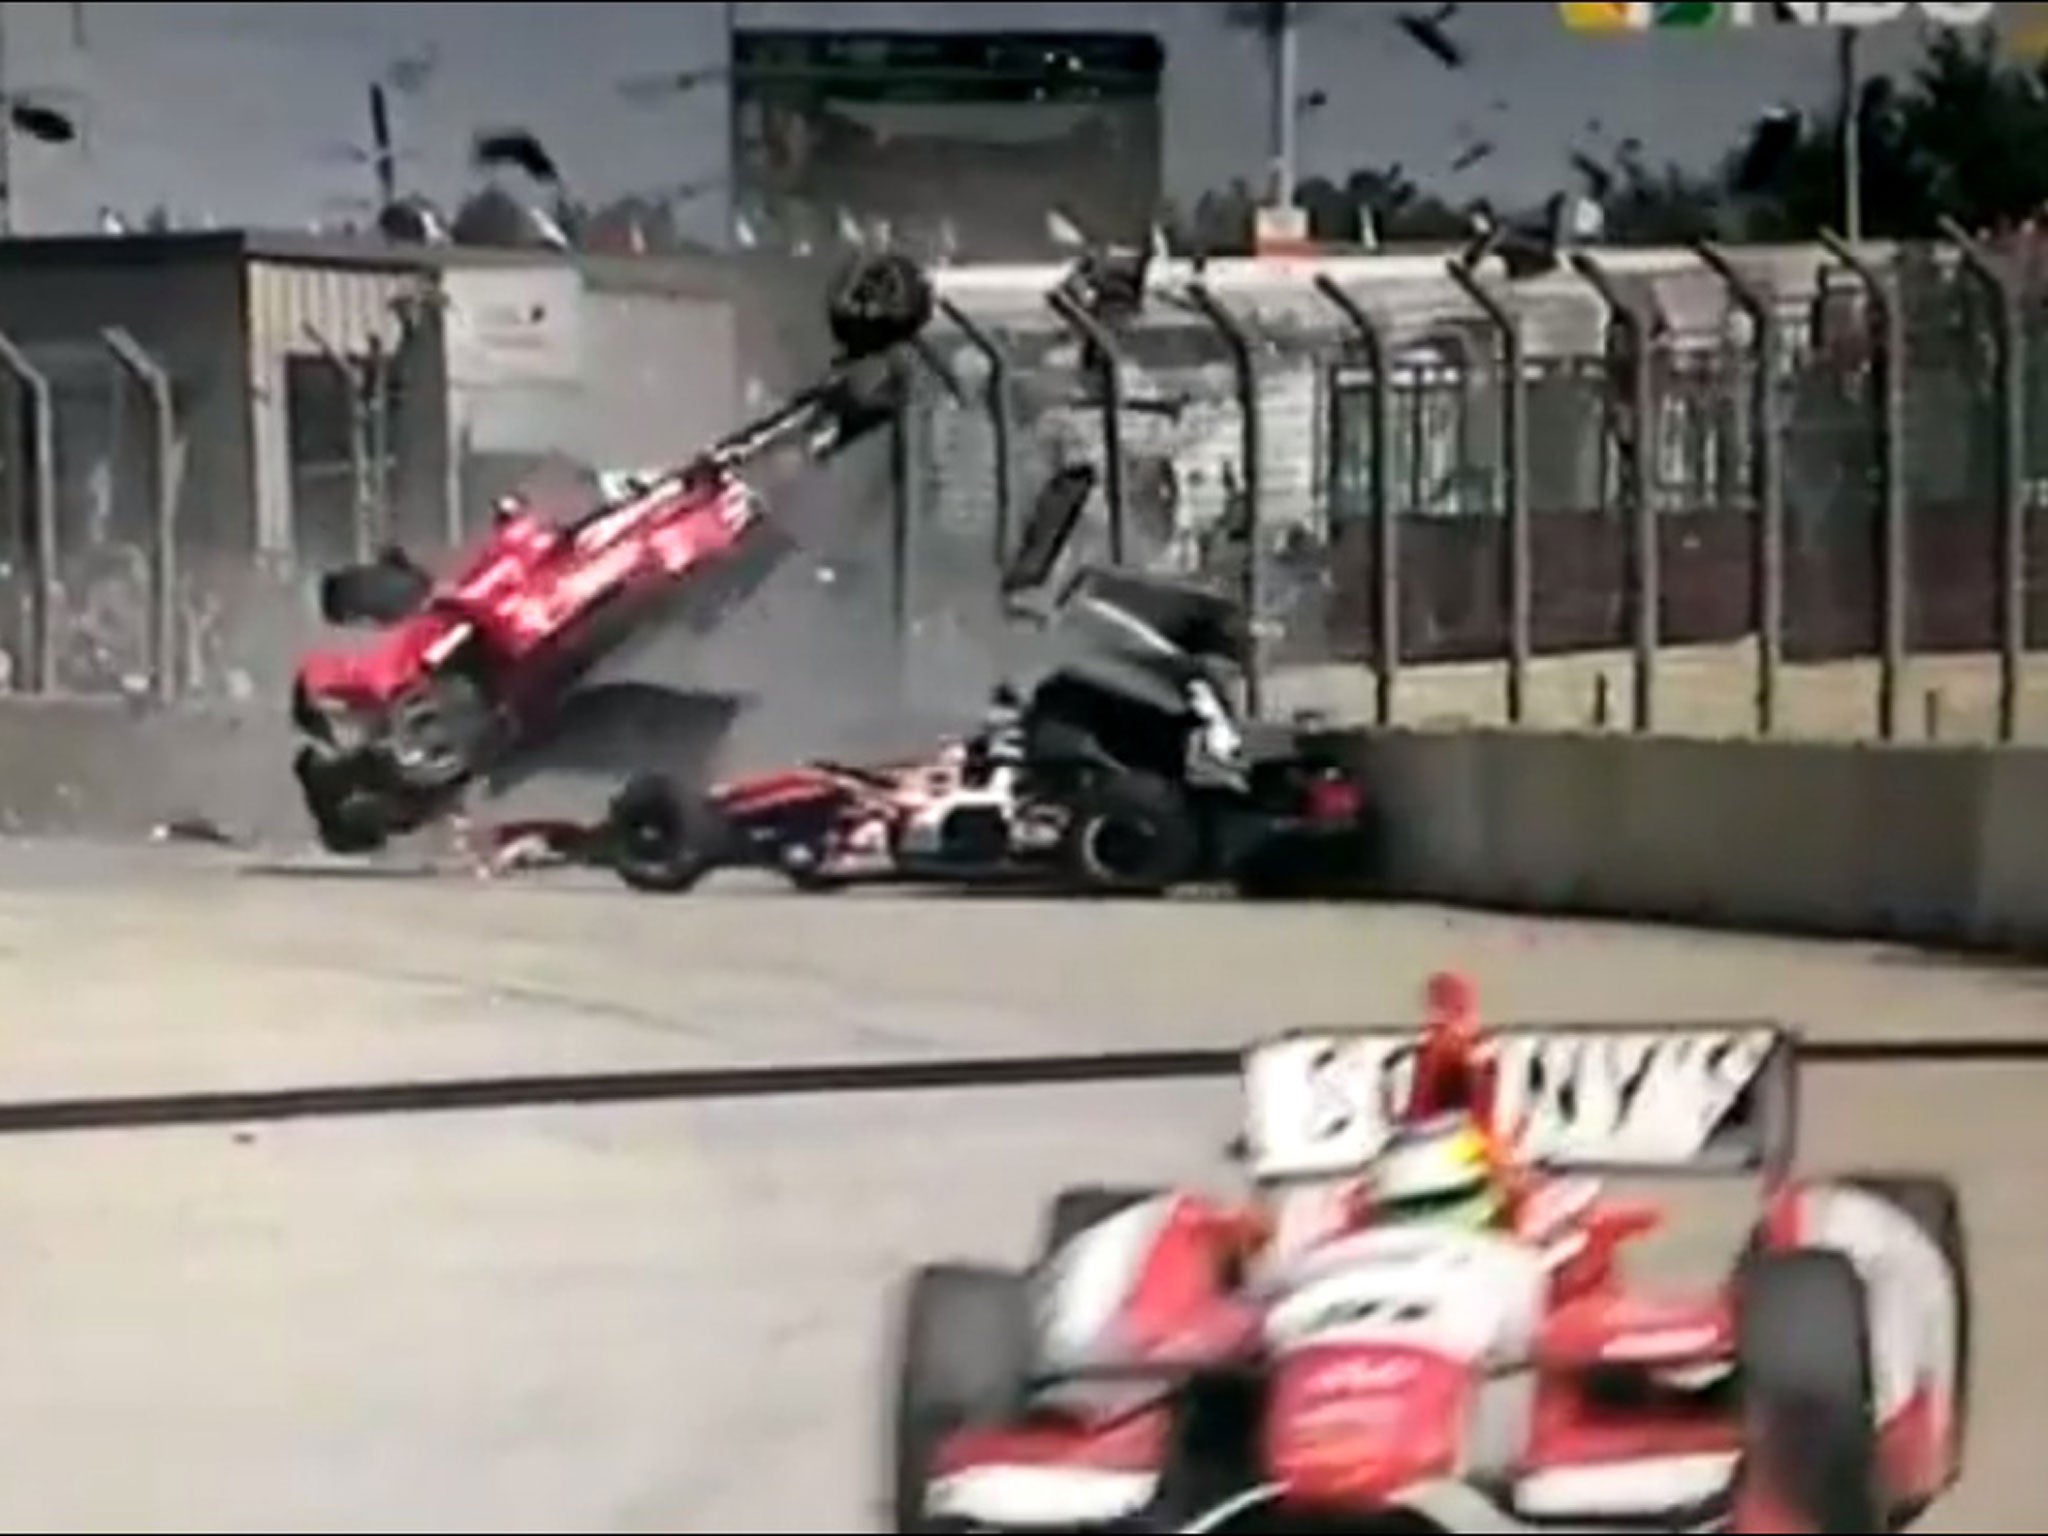 Dario Franchitti was injured in this horrifying crash after his IndyCar was launched into the air after he hit the wall